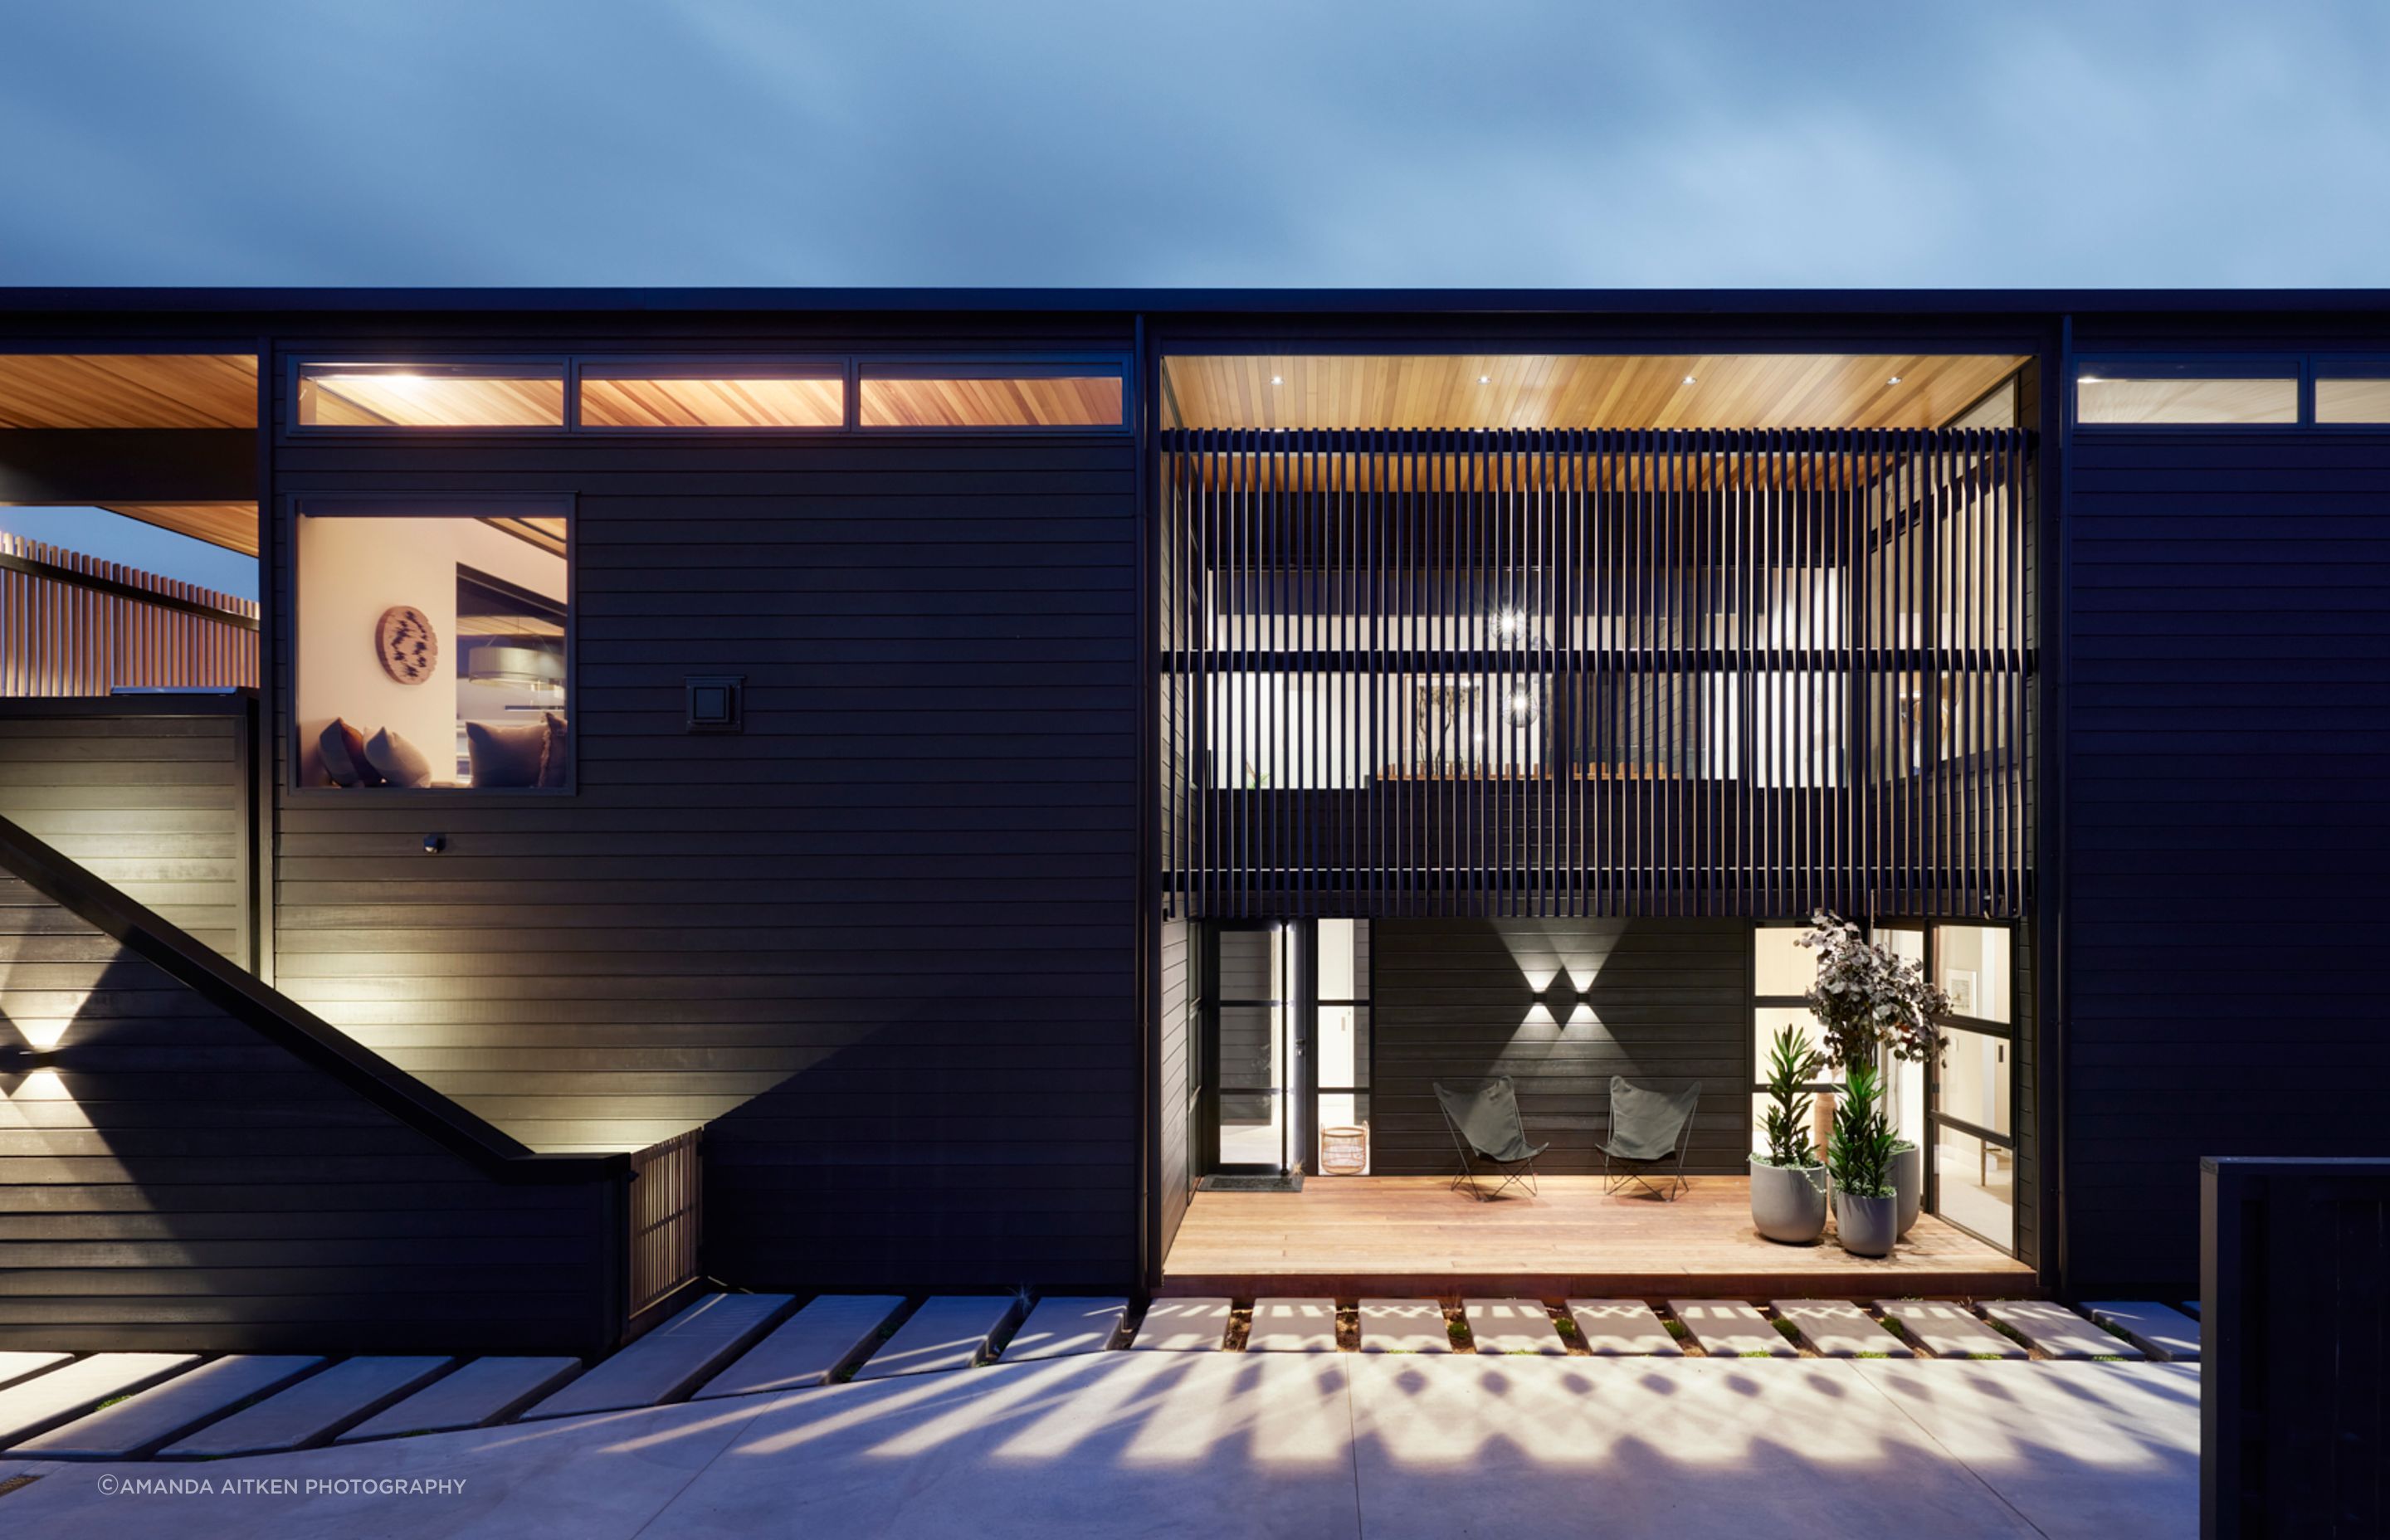 “There is an underlying Kiwi fascination with the black bach,” says Brendon. He has created options for outdoor living for all weather conditions.